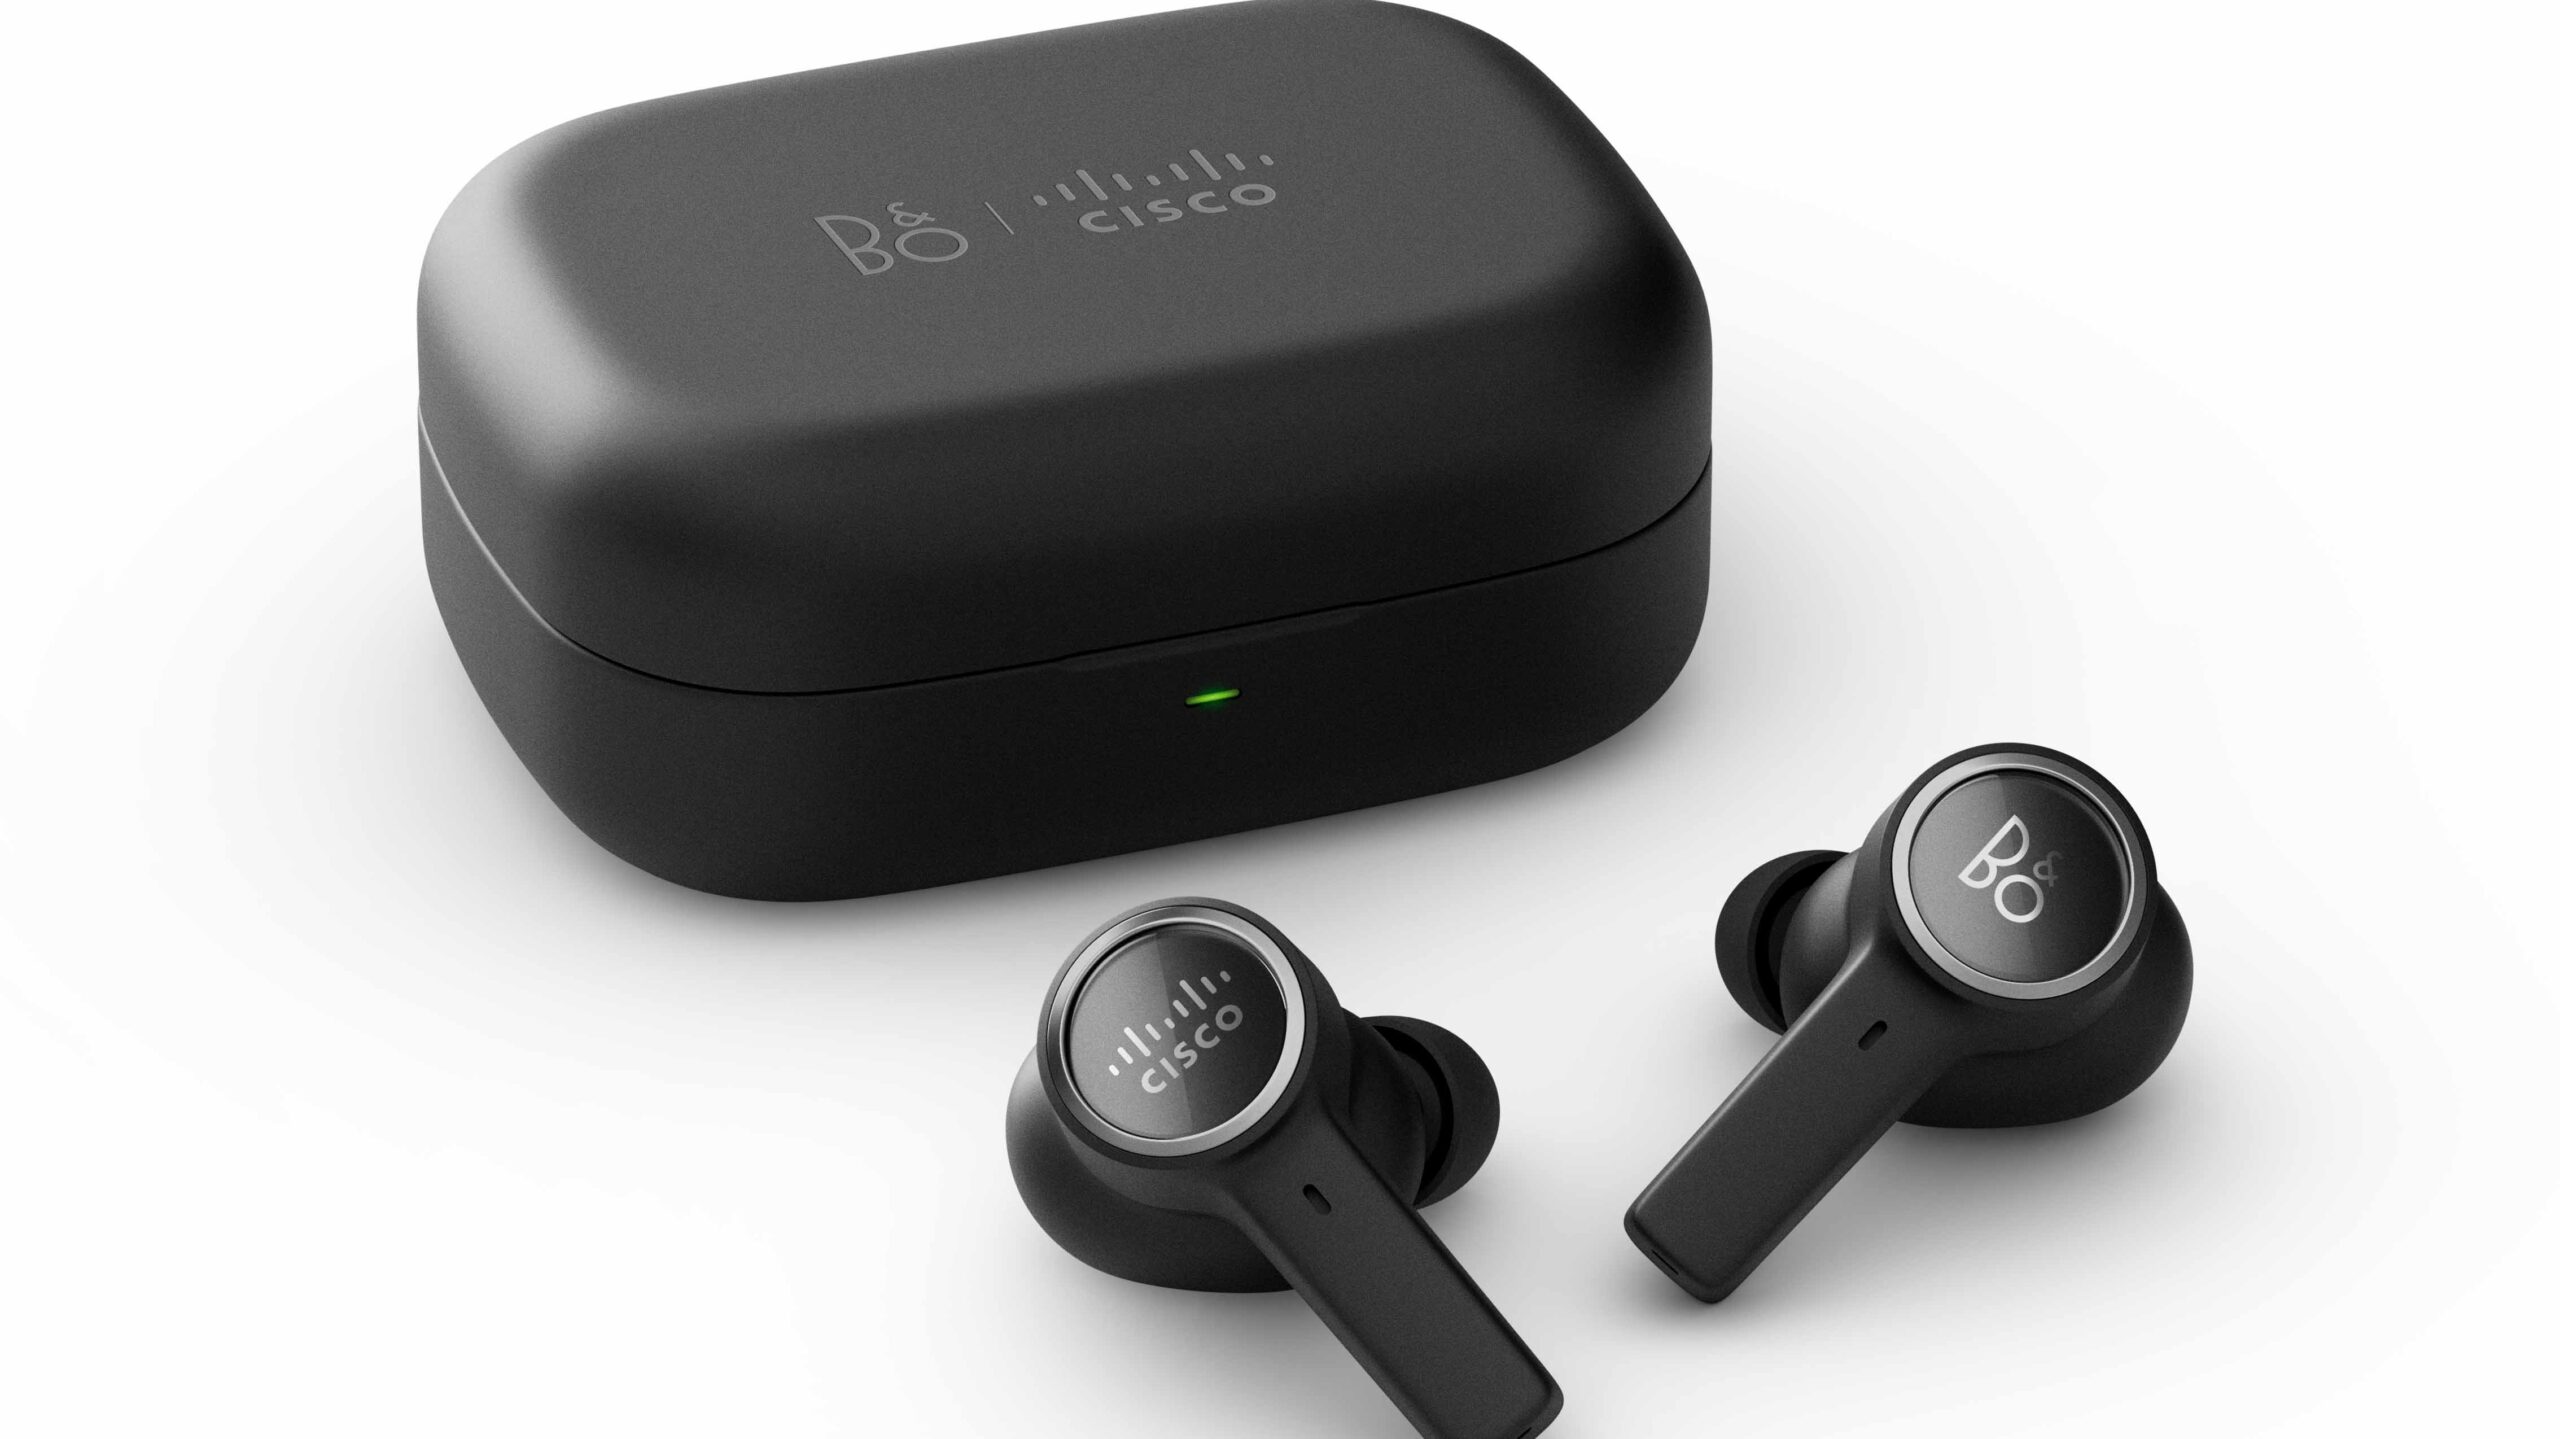 Cisco and Bang & Olufsen release new wireless earbuds ‘optimized for Webex’